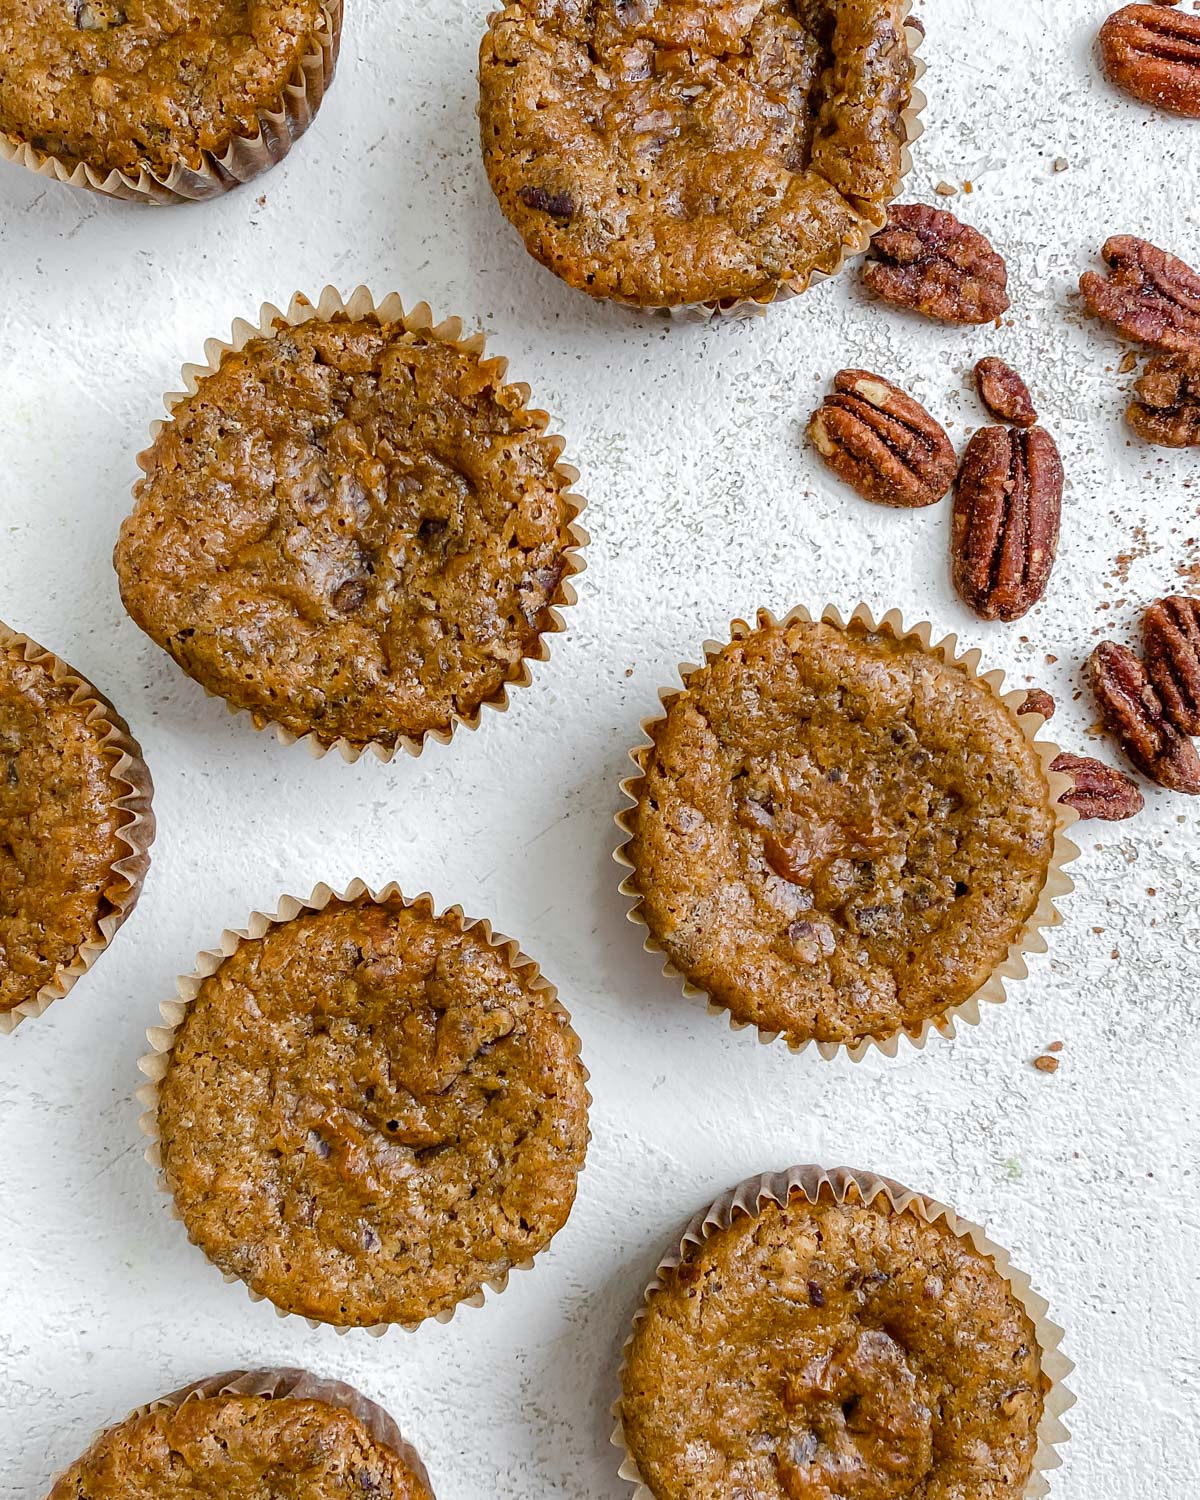 completed Vegan Cinnamon and Banana Pecan Muffins scattered on a white surface